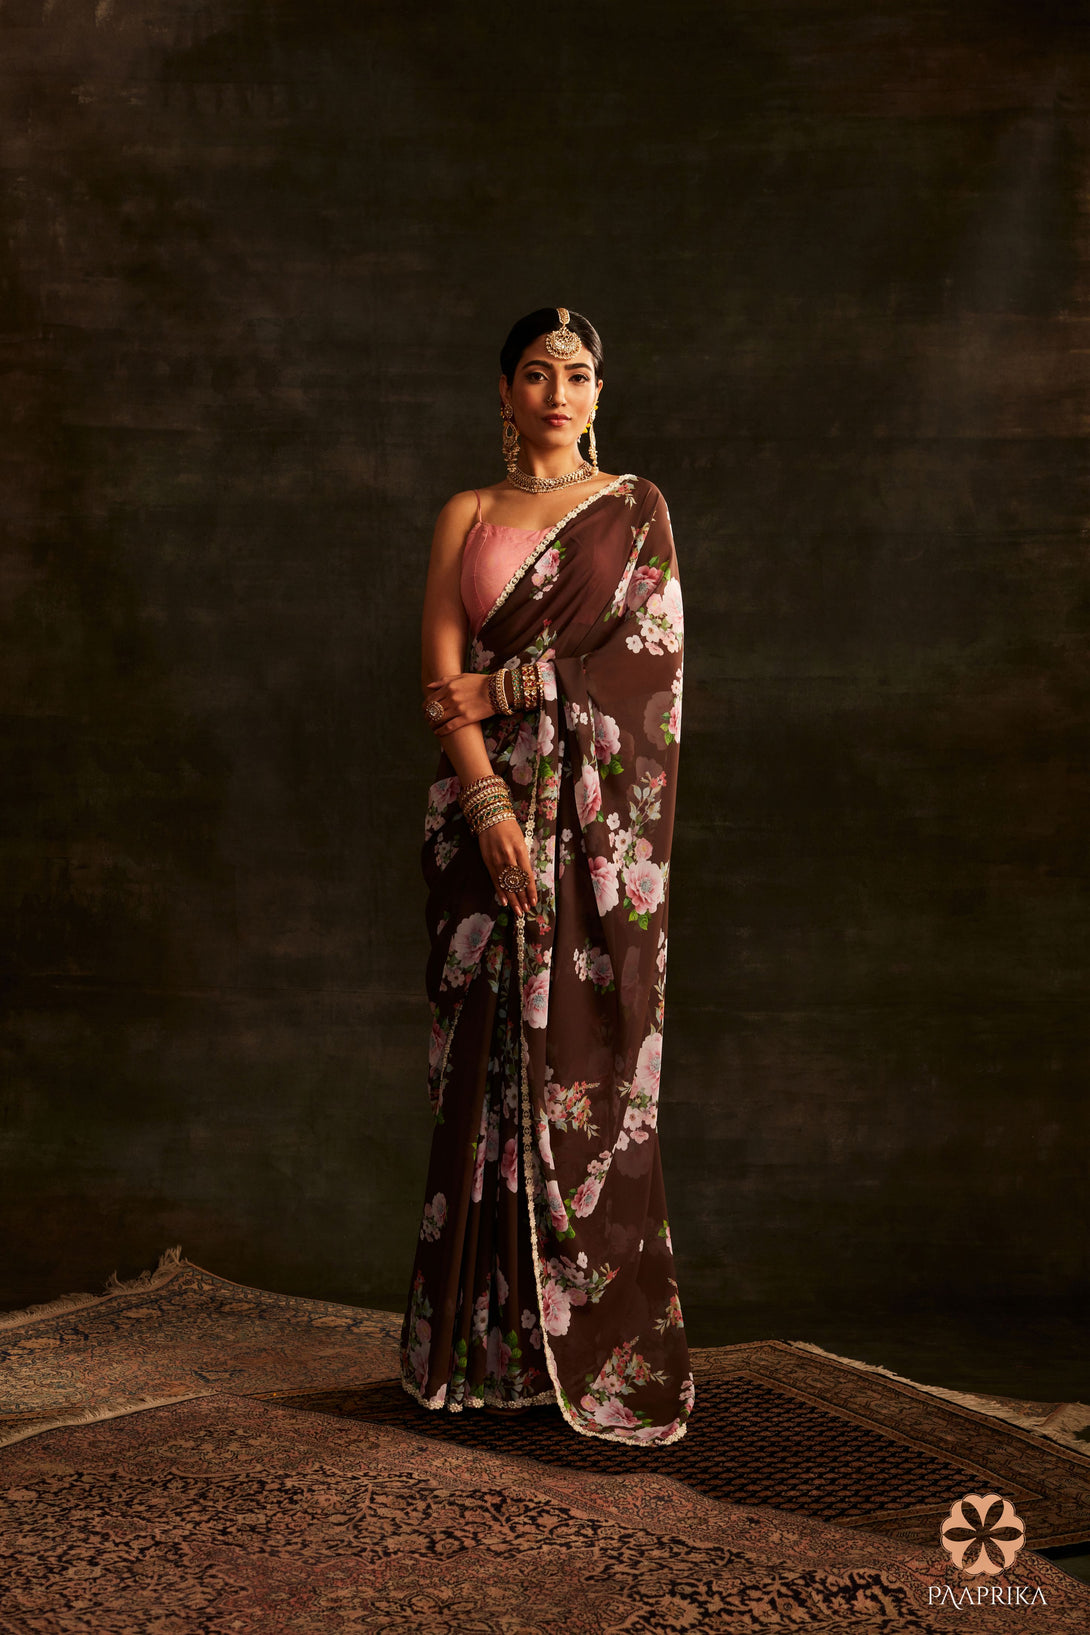  Beautiful drape of the Trendy Brown Floral Printed Georgette Saree, exuding earthy elegance. The lightweight georgette fabric drapes gracefully, highlighting the captivating floral prints.